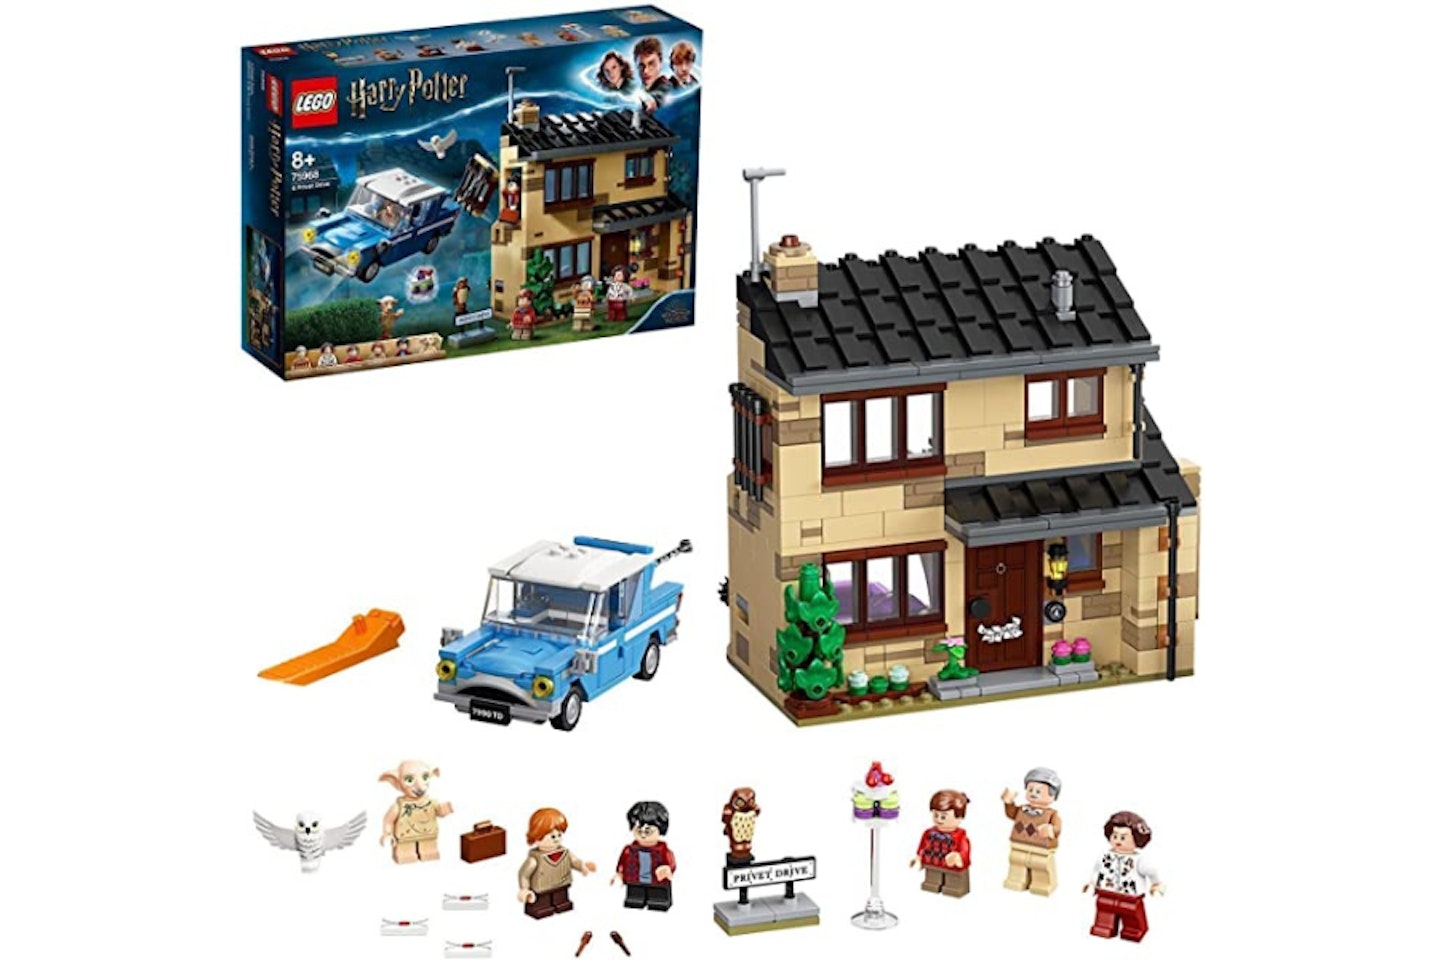 LEGO 75968 Harry Potter 4 Privet Drive House and Ford Anglia Car Toy